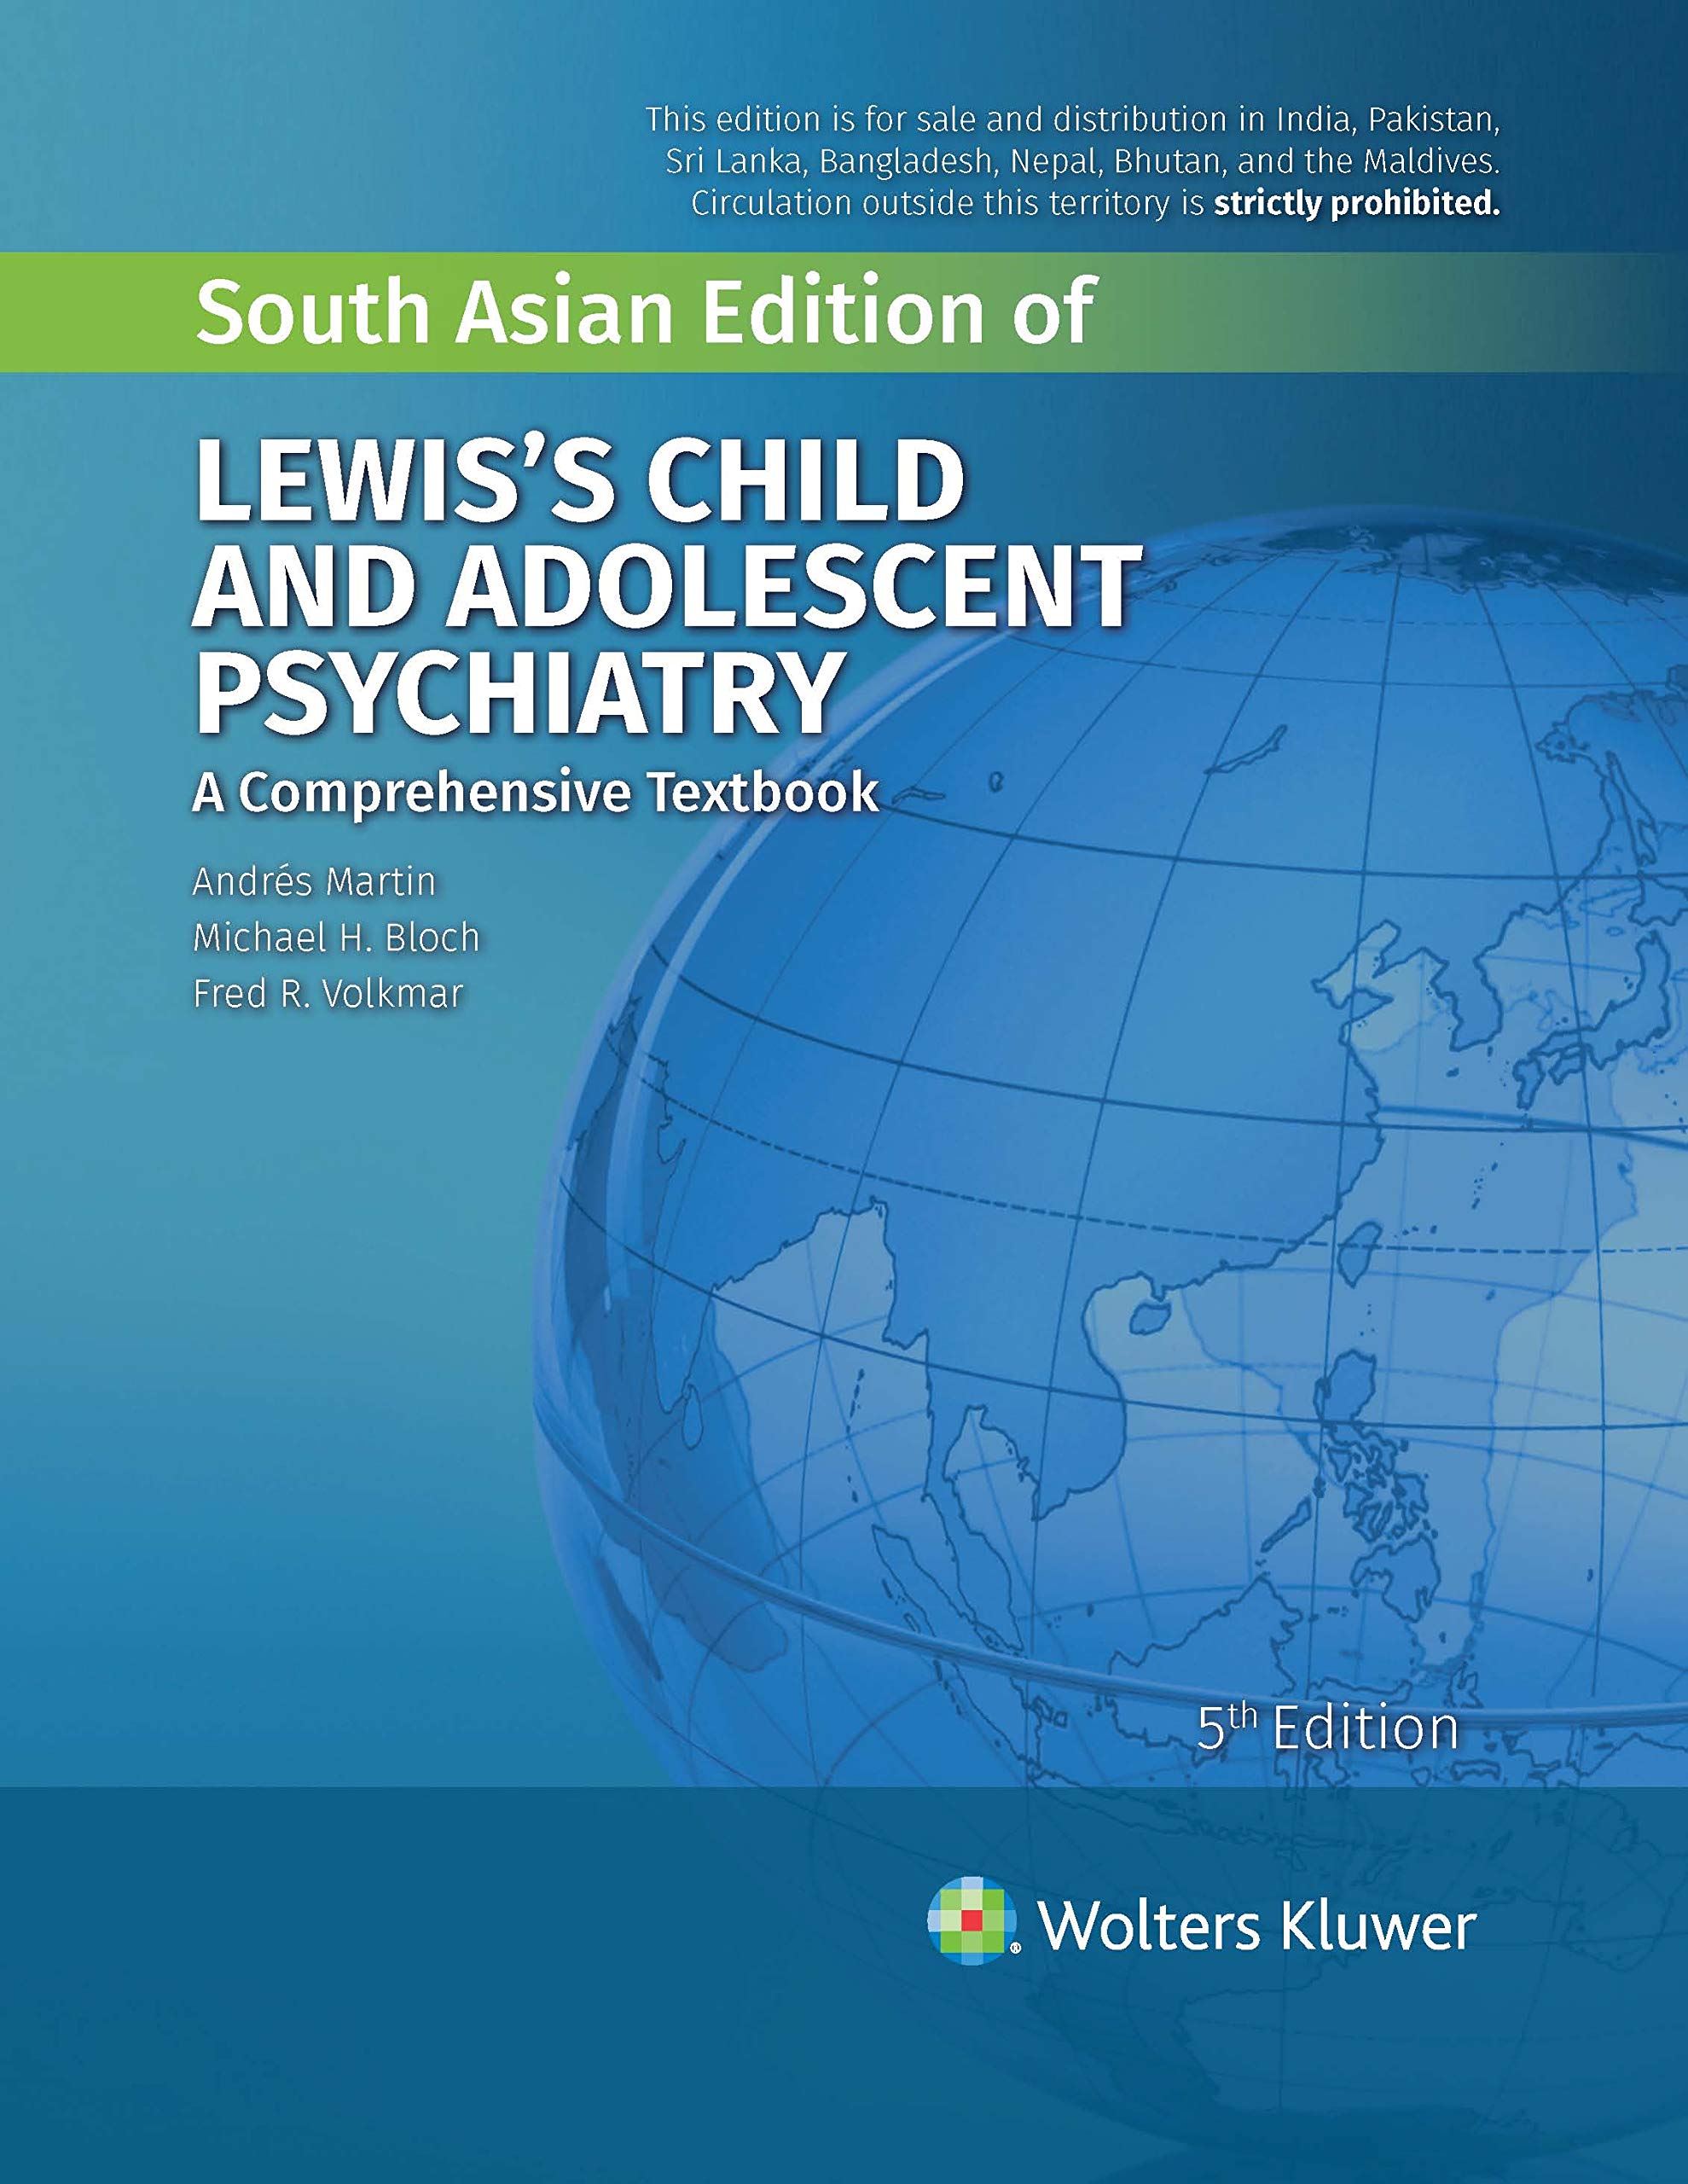 Lewis'S Child And Adolescent Psychiatry: A Comprehensive Textbook, 5Th Edition - AIBH Exclusive